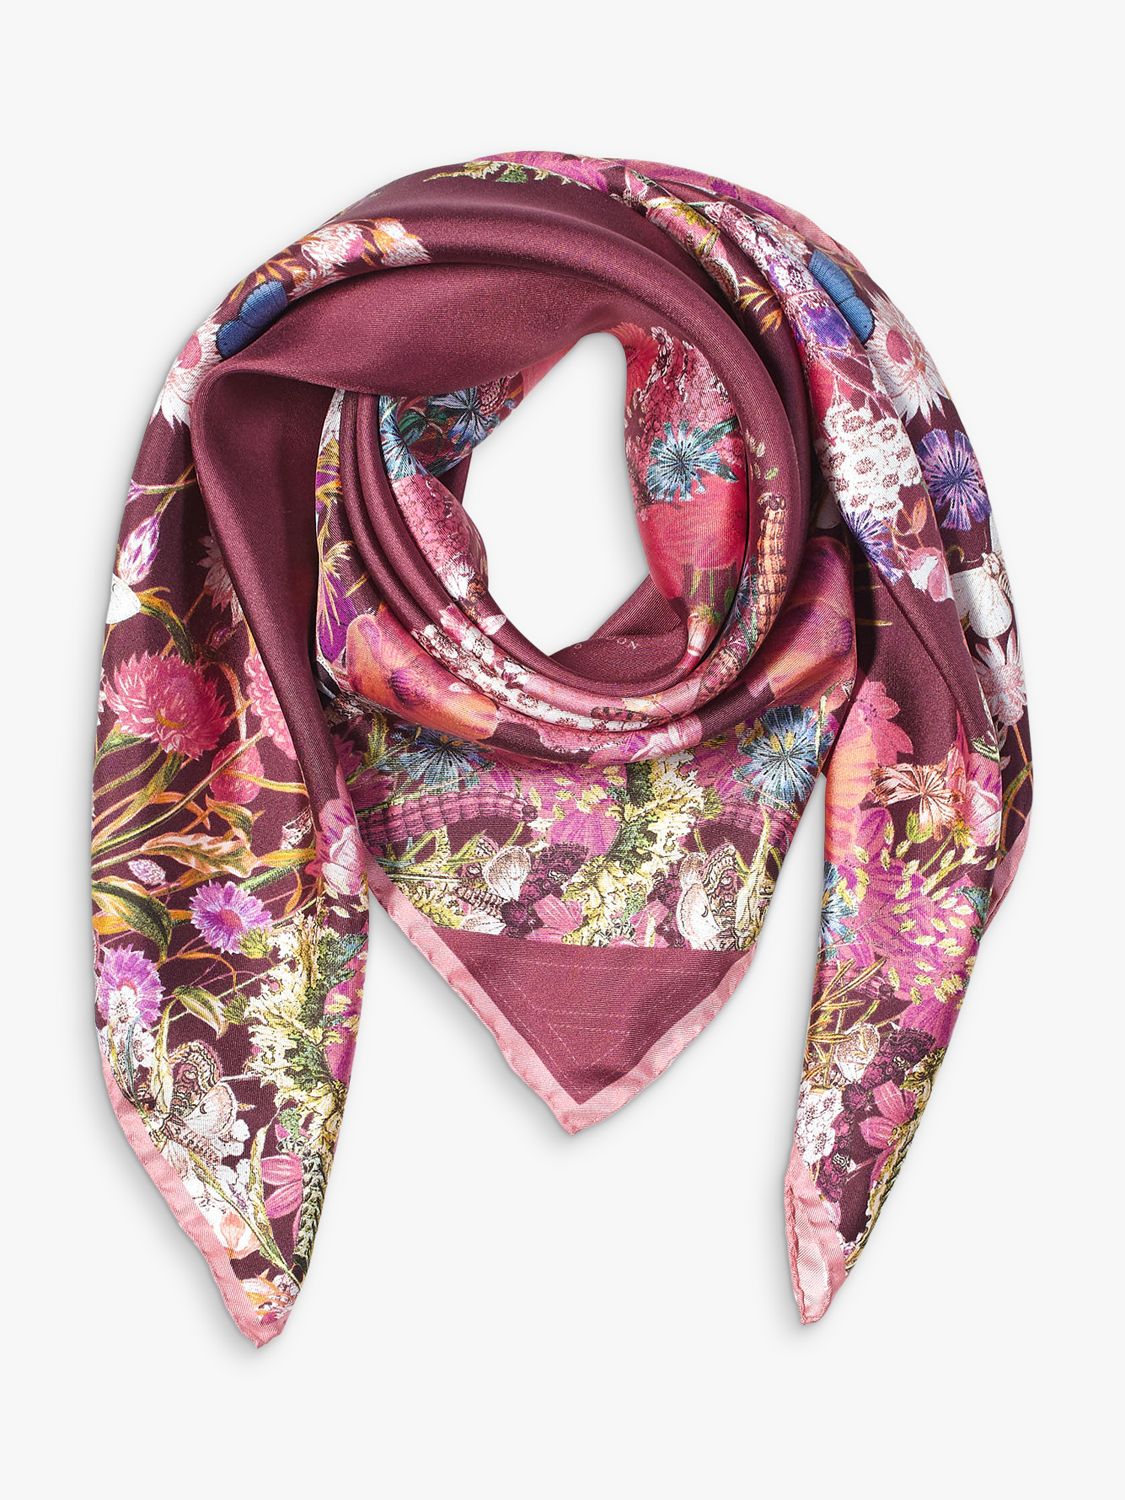 Aspinal of London Ombre A Floral Silk Square Scarf, Bordeaux